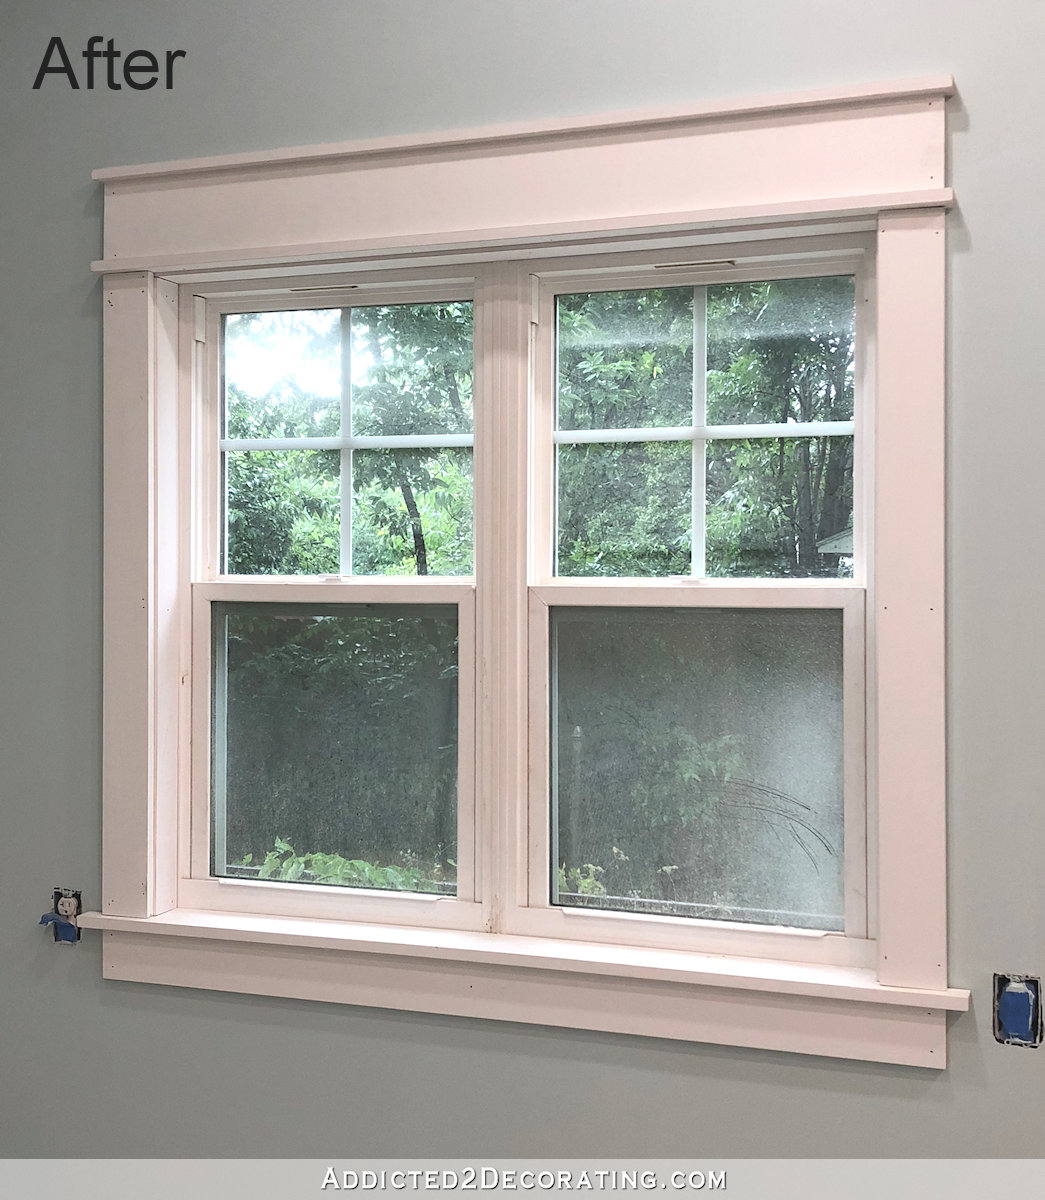 How to install easy DIY window casings (with no miter cuts!)